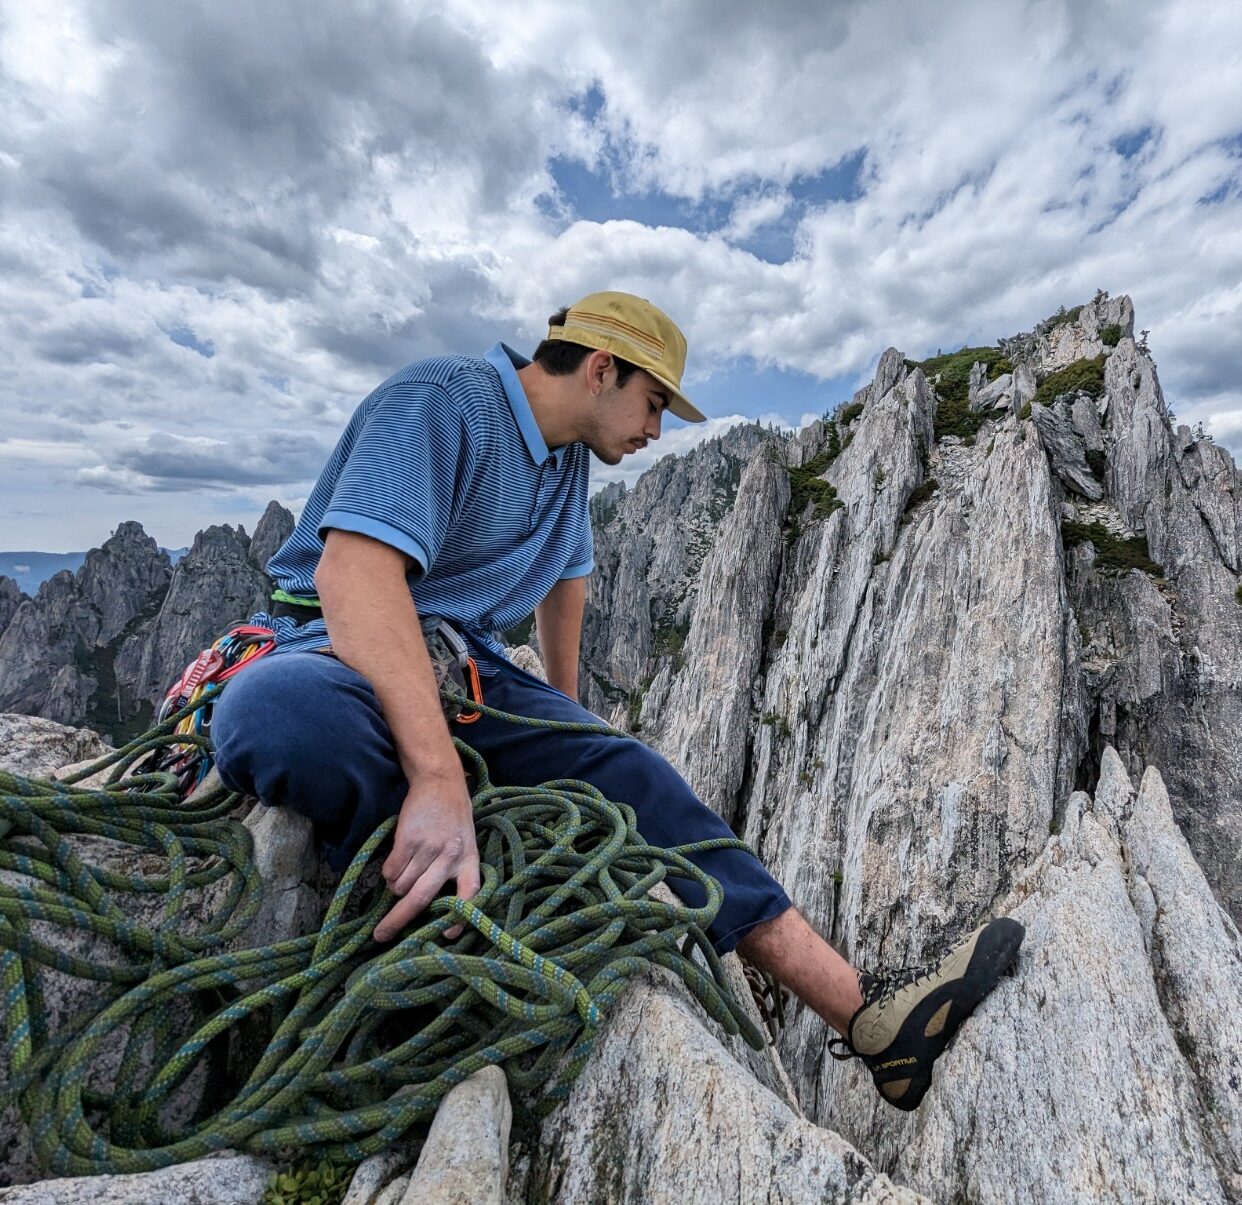 Photo of Jake atop a mountain of grey stone. He is wearing a blue shirt and tan hat. There is green rock climbing rope in the foreground.